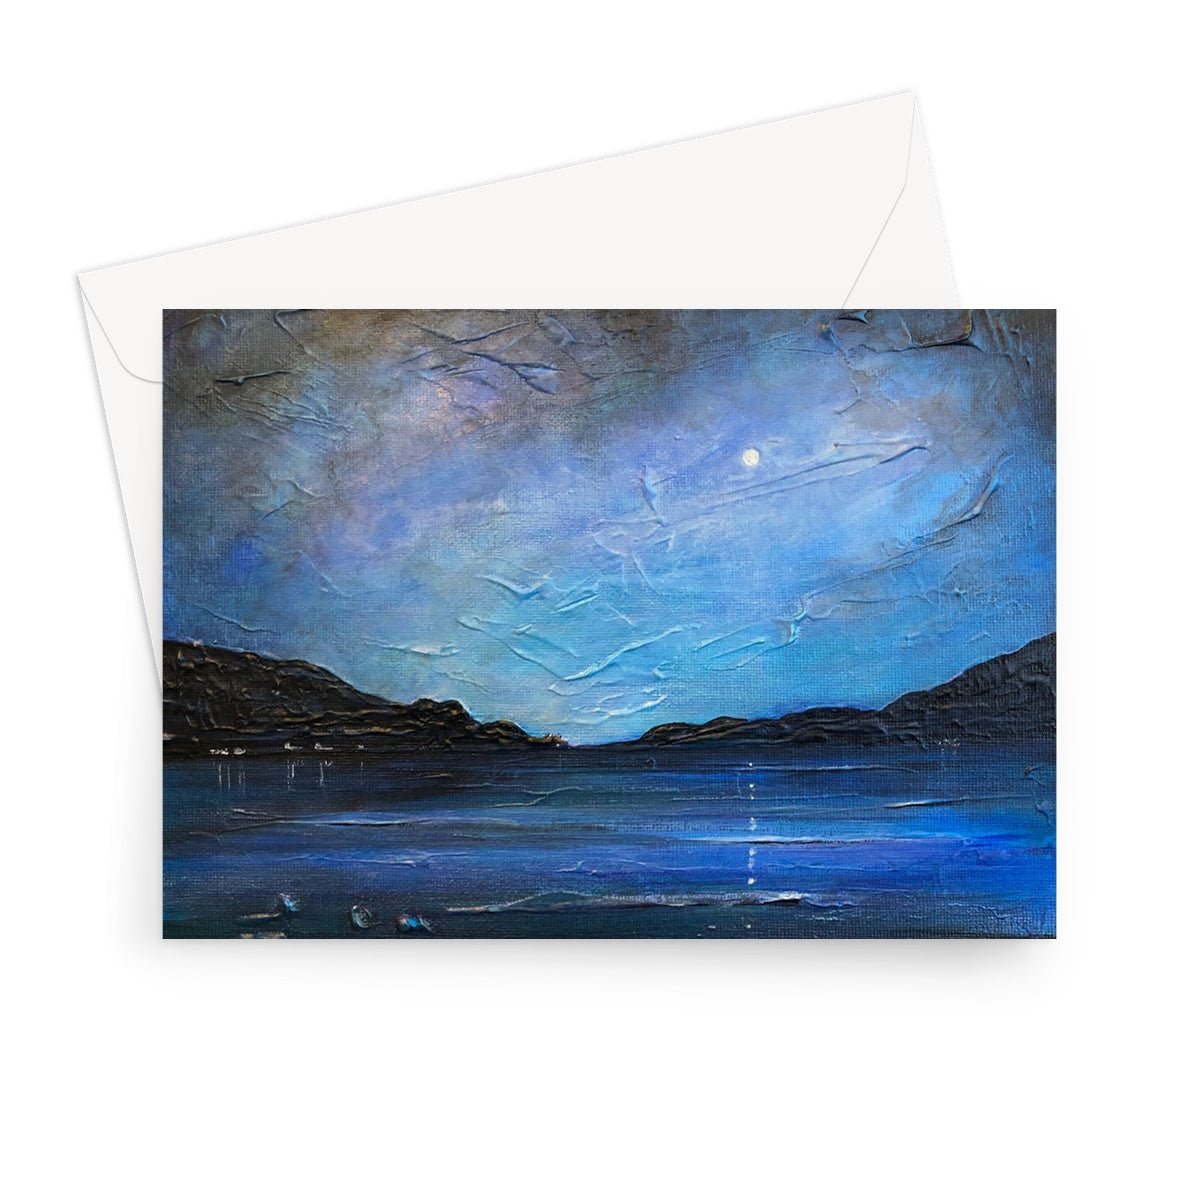 Loch Ness Moonlight Art Gifts Greeting Card-Greetings Cards-Scottish Lochs & Mountains Art Gallery-7"x5"-1 Card-Paintings, Prints, Homeware, Art Gifts From Scotland By Scottish Artist Kevin Hunter